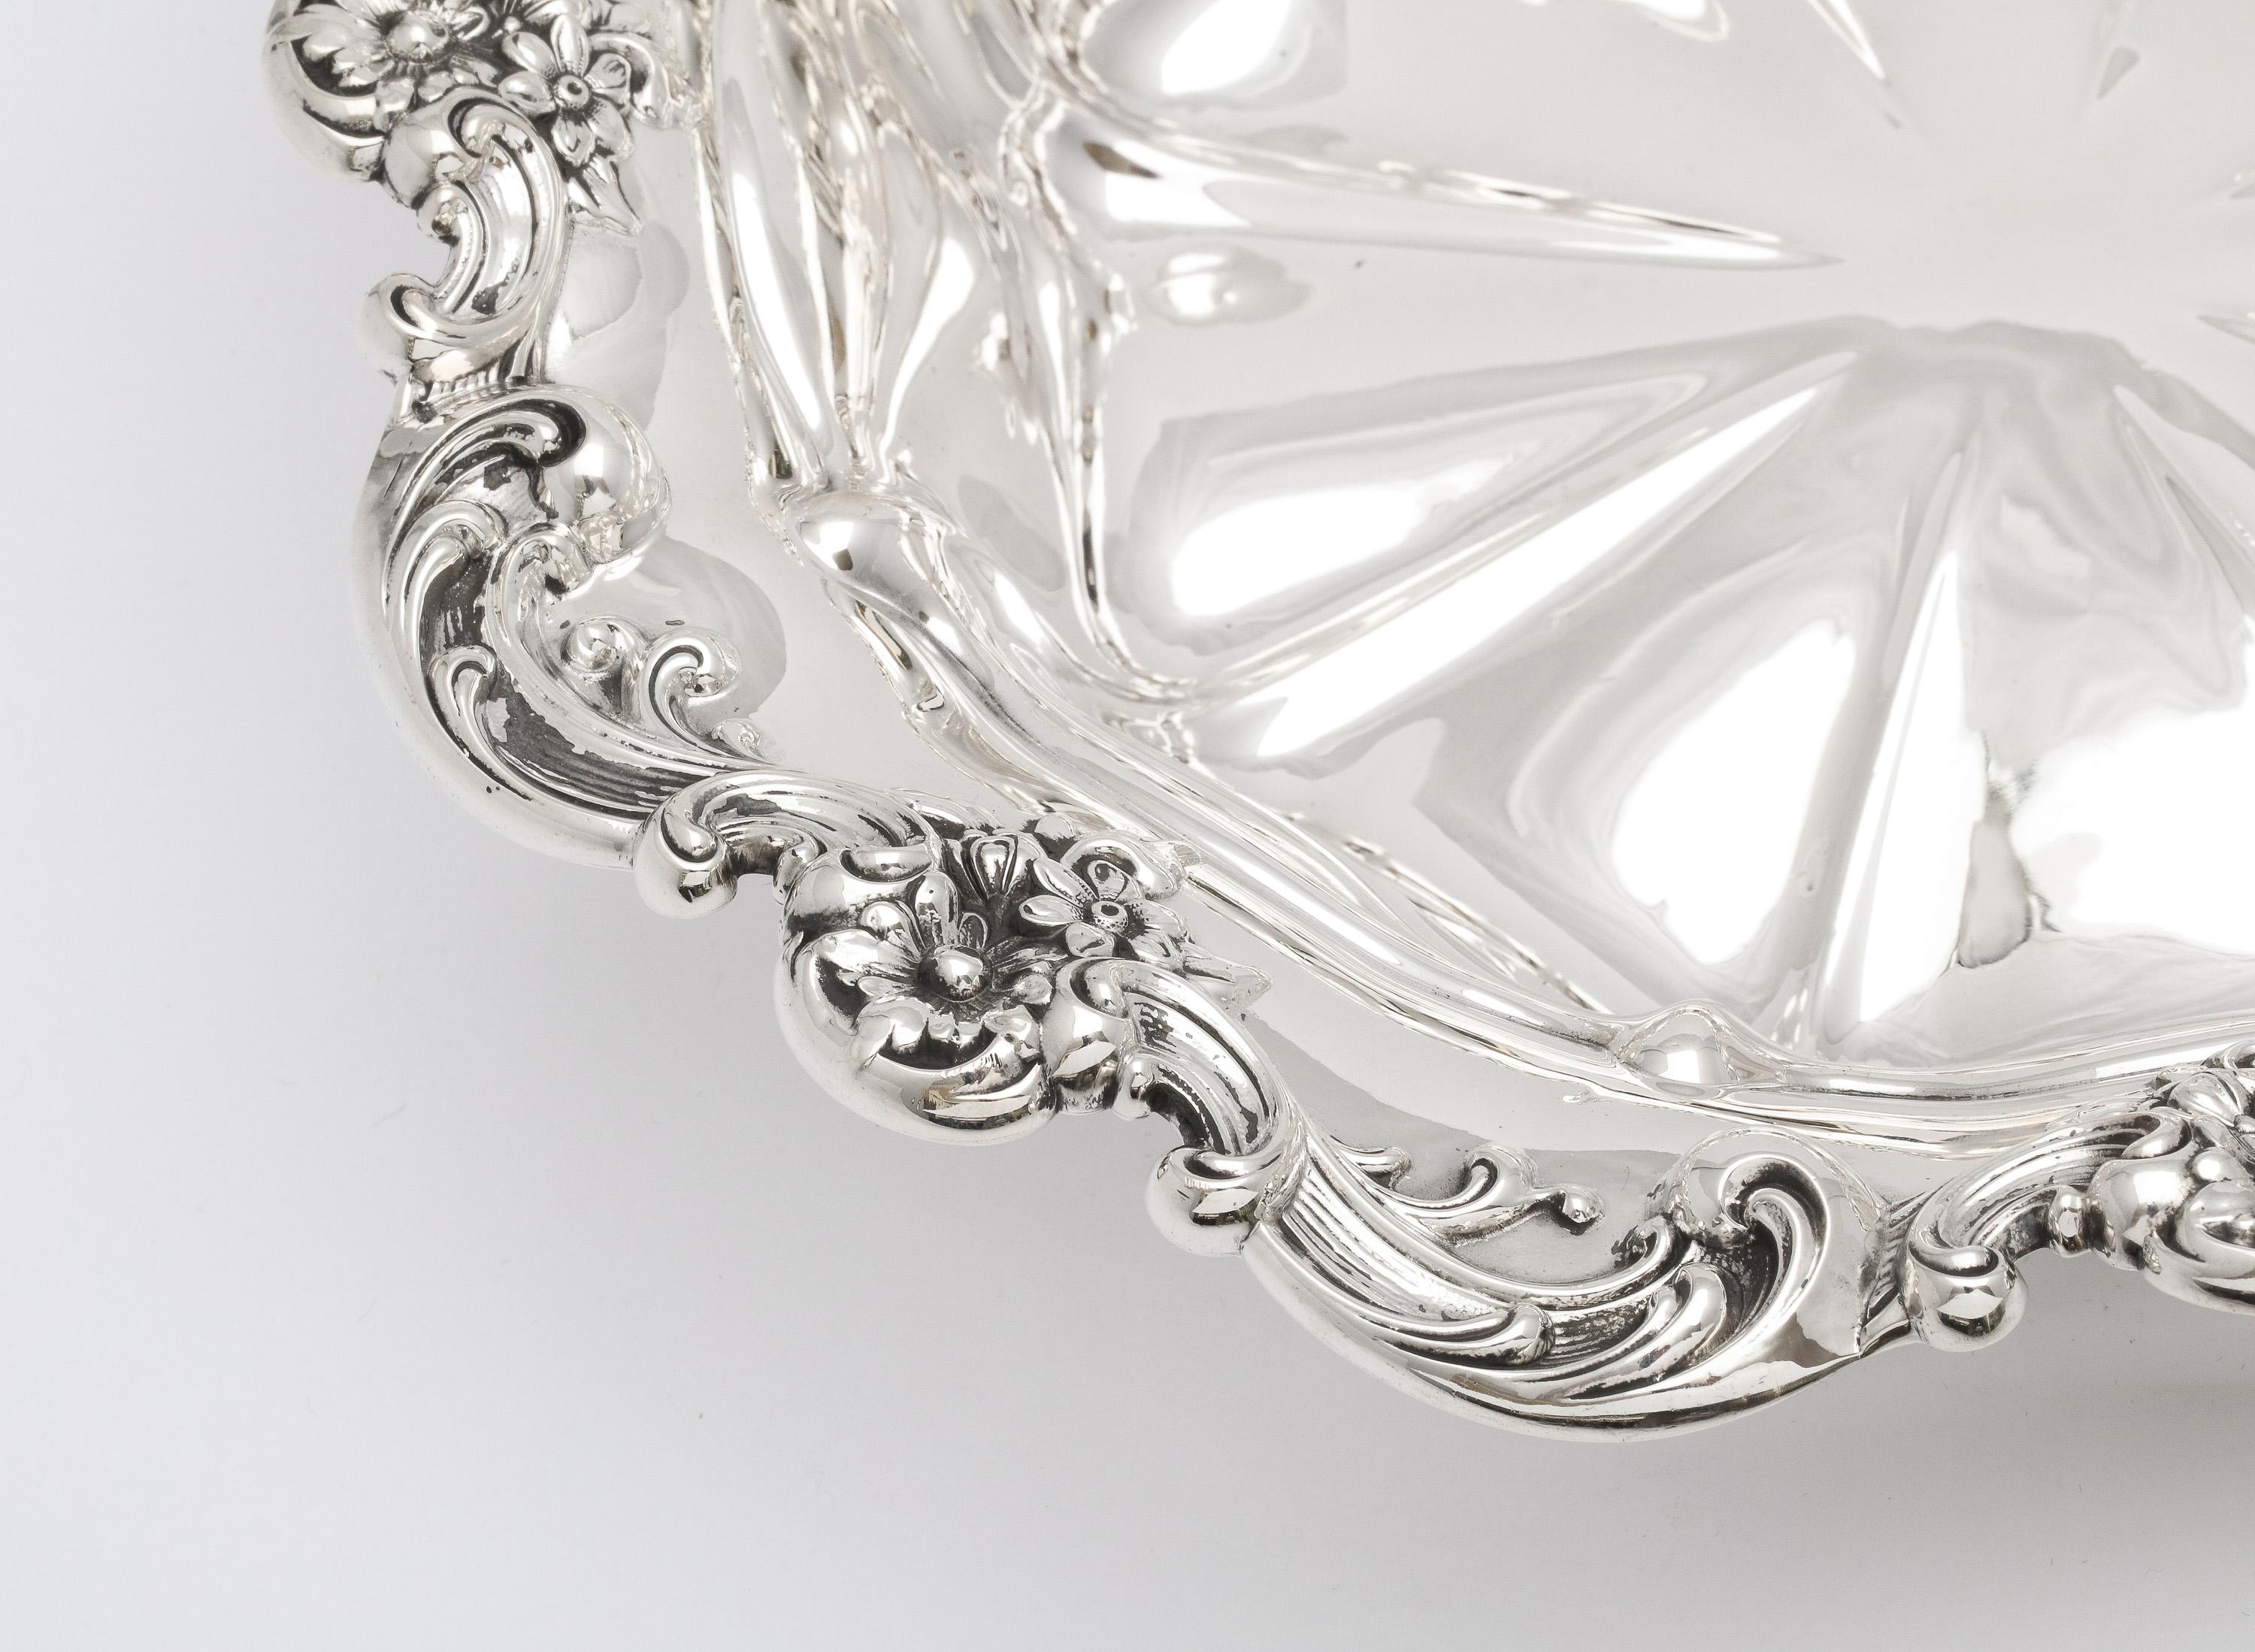 Beautiful Victorian-Style Sterling Silver Centerpiece Bowl By Gorham For Sale 4